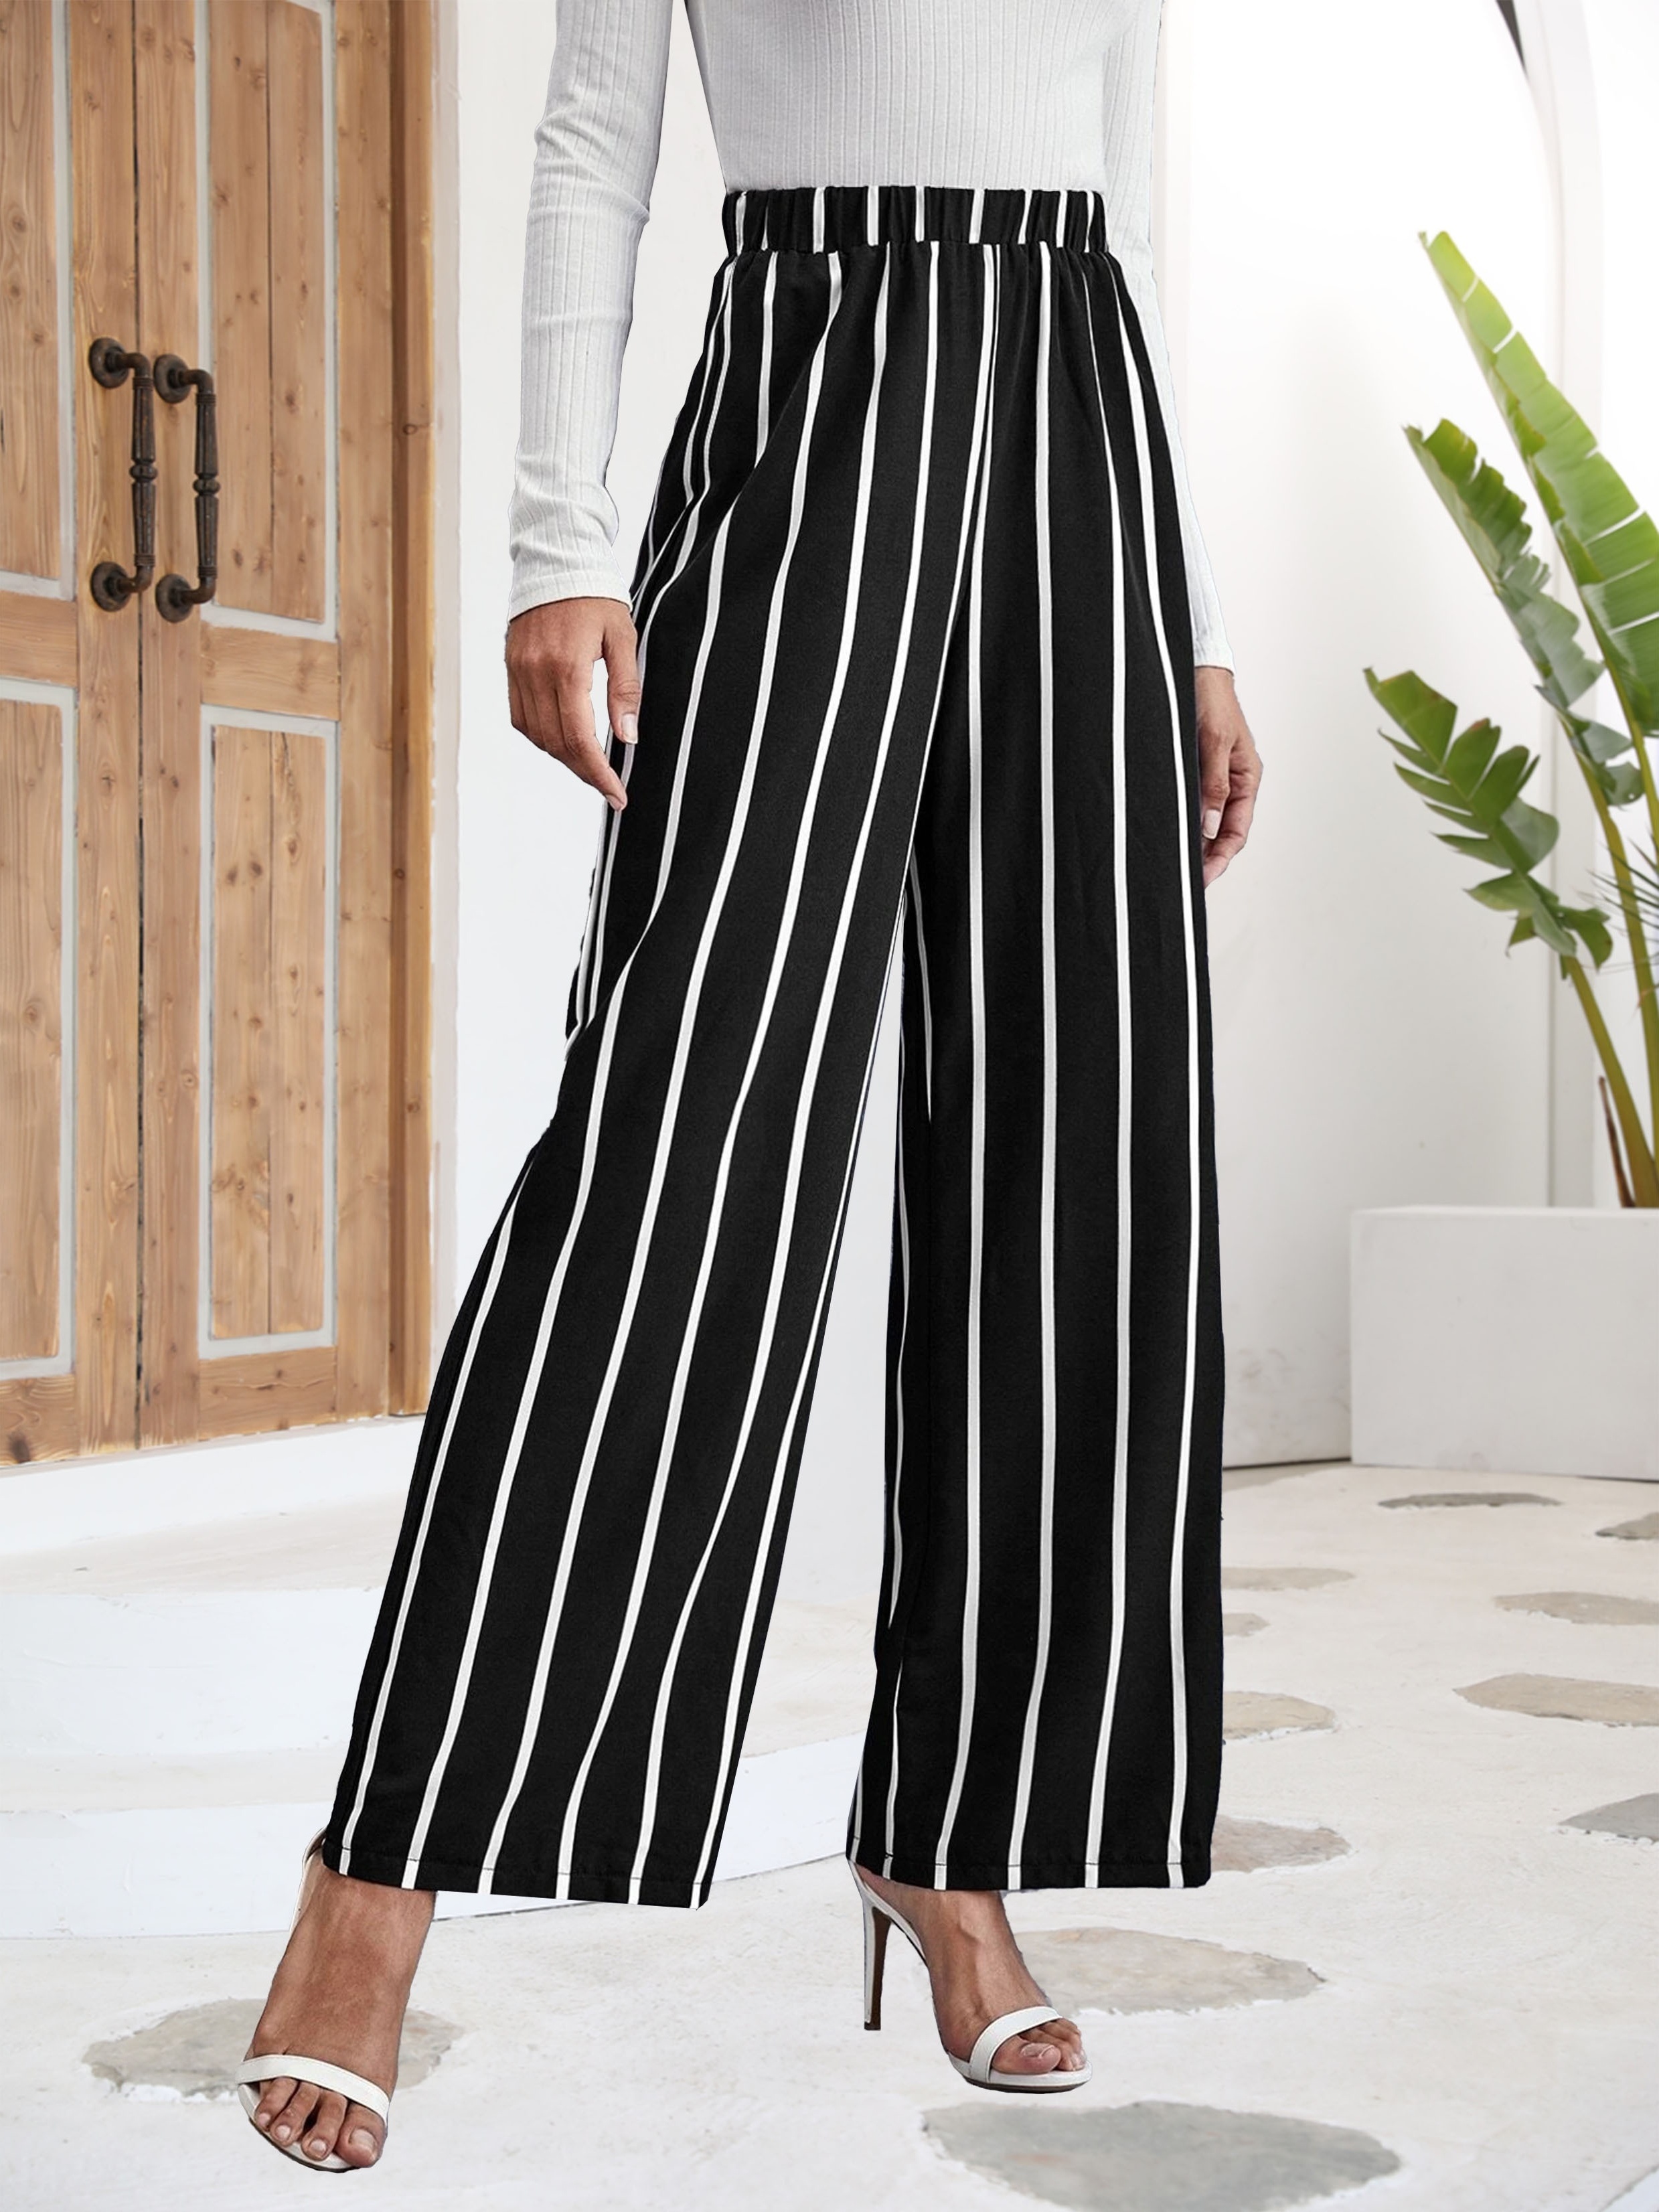 Striped High Waist Straight Leg Pants, Casual Elastic Waist Pants For  Vacation, Women's Clothing